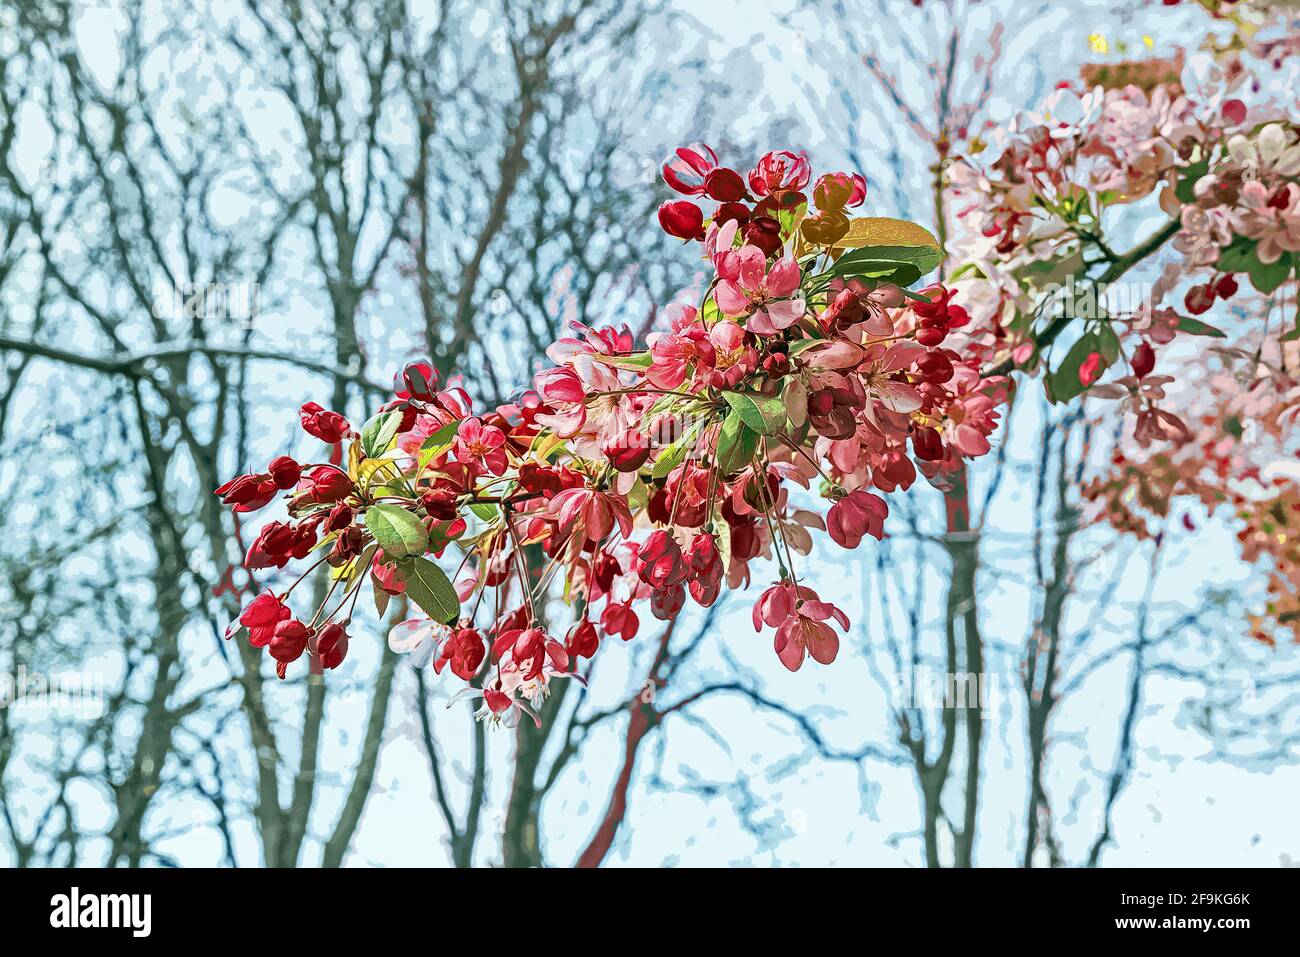 Photo illustration of Crab Apple blossom trees herald the arrival of warmer days ahead in Devonport Park, Plymouth Devonport Park in Plymouth is often Stock Photo